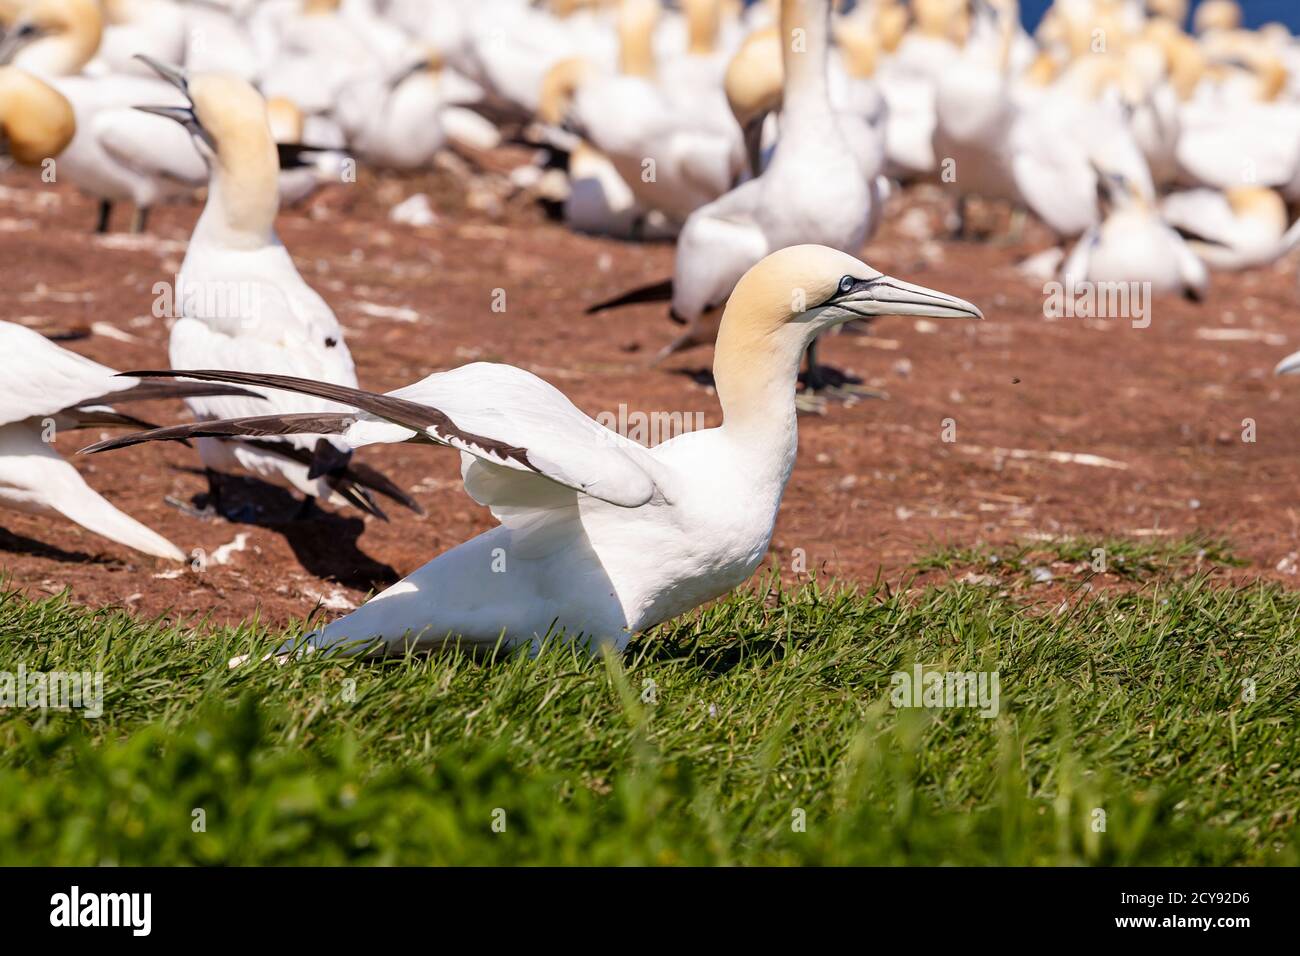 A colony of northern gannets on Bonaventure Island Stock Photo